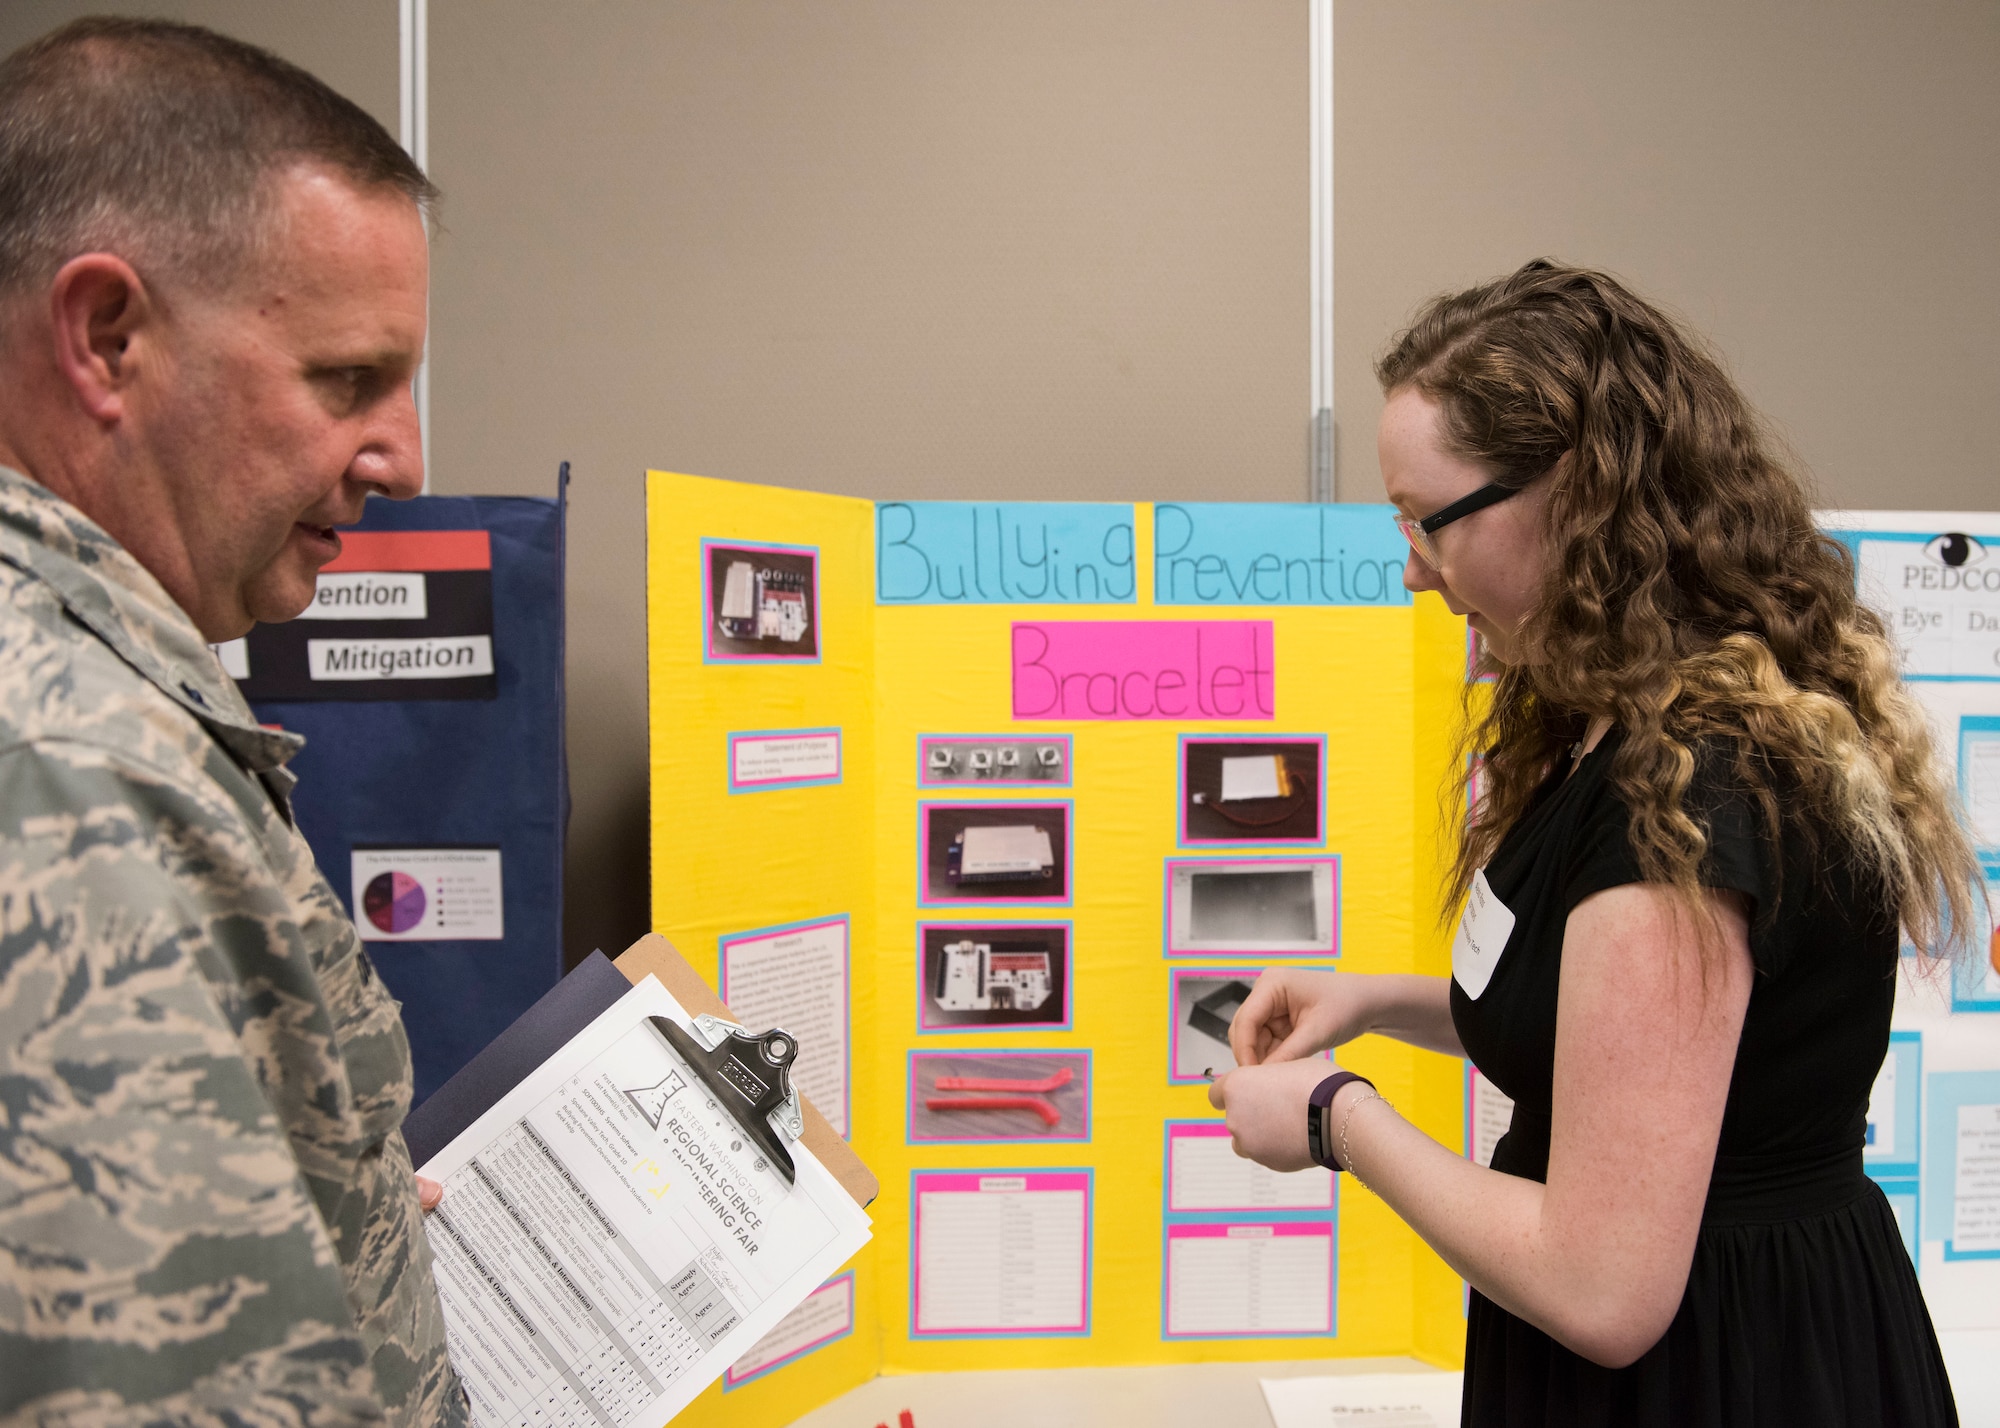 Lt. Col. Gavin Dillon, 92nd Medical Group Bioenvironmental Engineering commander, reviews the project of Alexis Ross, Spokane Valley Tech student, during the Eastern Washington Regional Science and Engineering Fair at the Spokane Washington State University campus, Washington, March 15, 2018. Team Fairchild attended the fair as part of the Installation Diversity Initiative, which aims to diversify and uplift the U.S. Air Force by recruiting the best and brightest minds. (U.S. Air Force photo/Senior Airman Ryan Lackey)